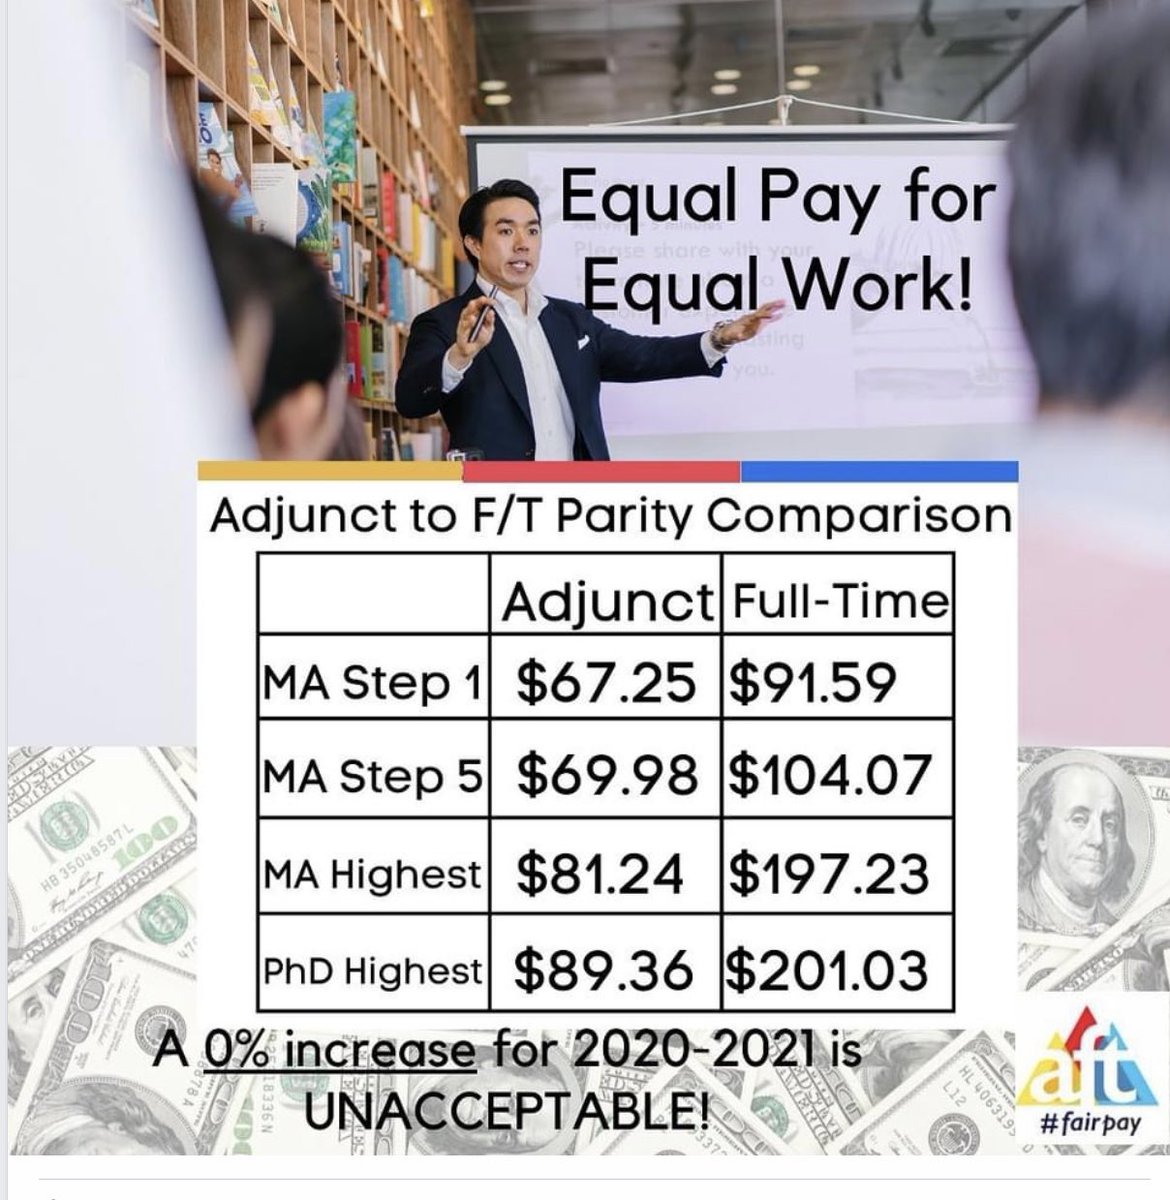 Adjunct faculty have the same minimum qualifications and teach the exact same courses as full-time faculty. Nevertheless, we earn far less money than full-time faculty. We demand equal pay for equal work!